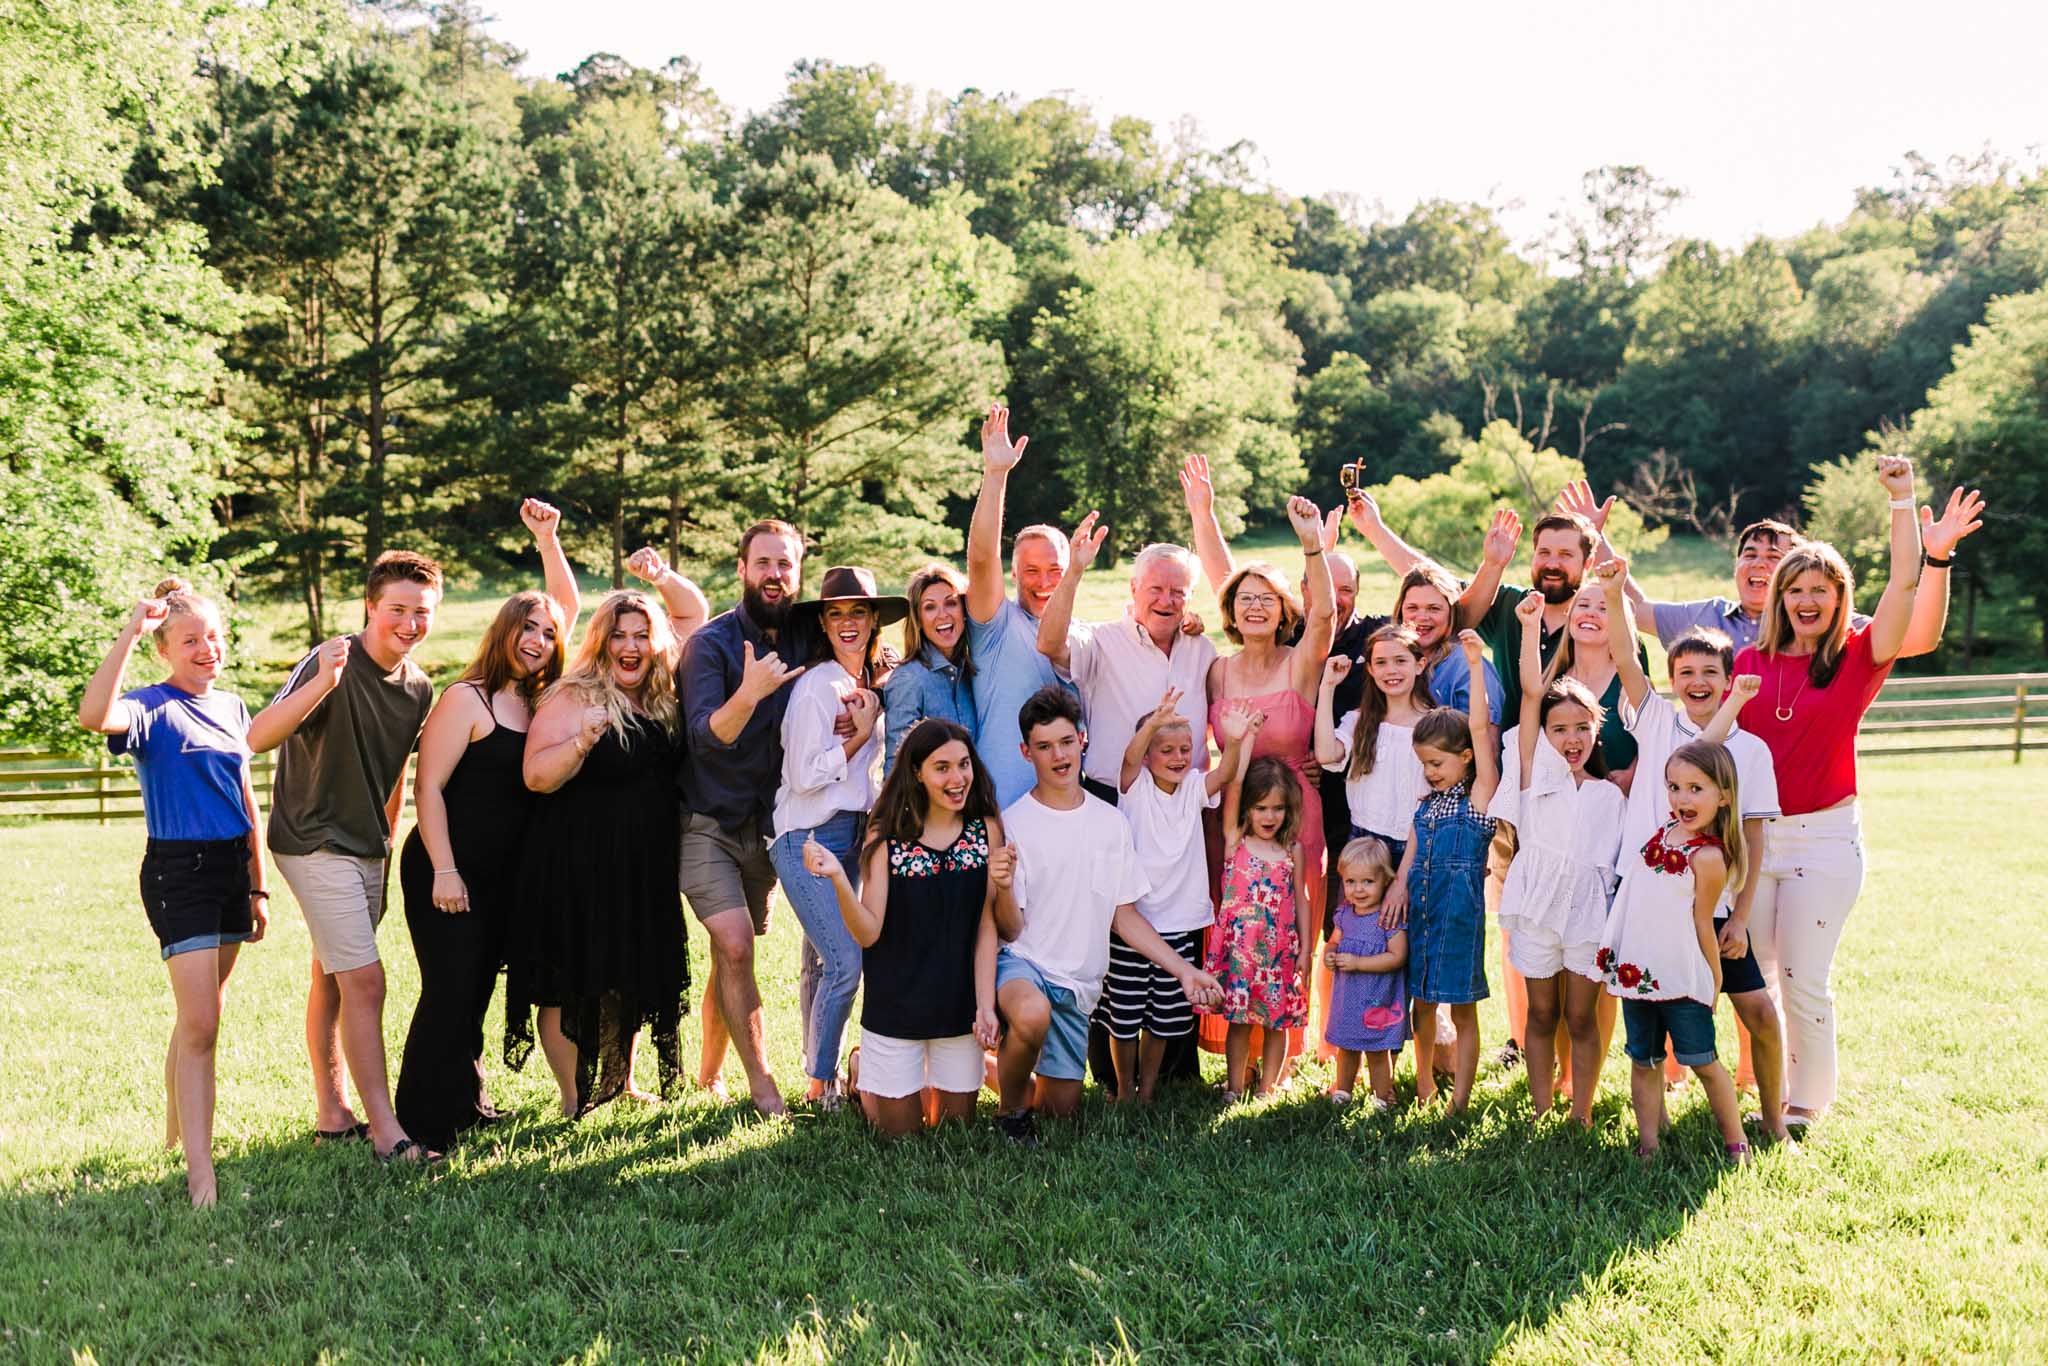 Durham Family Photographer | By G. Lin Photography | Group photo of people smiling and cheering outside